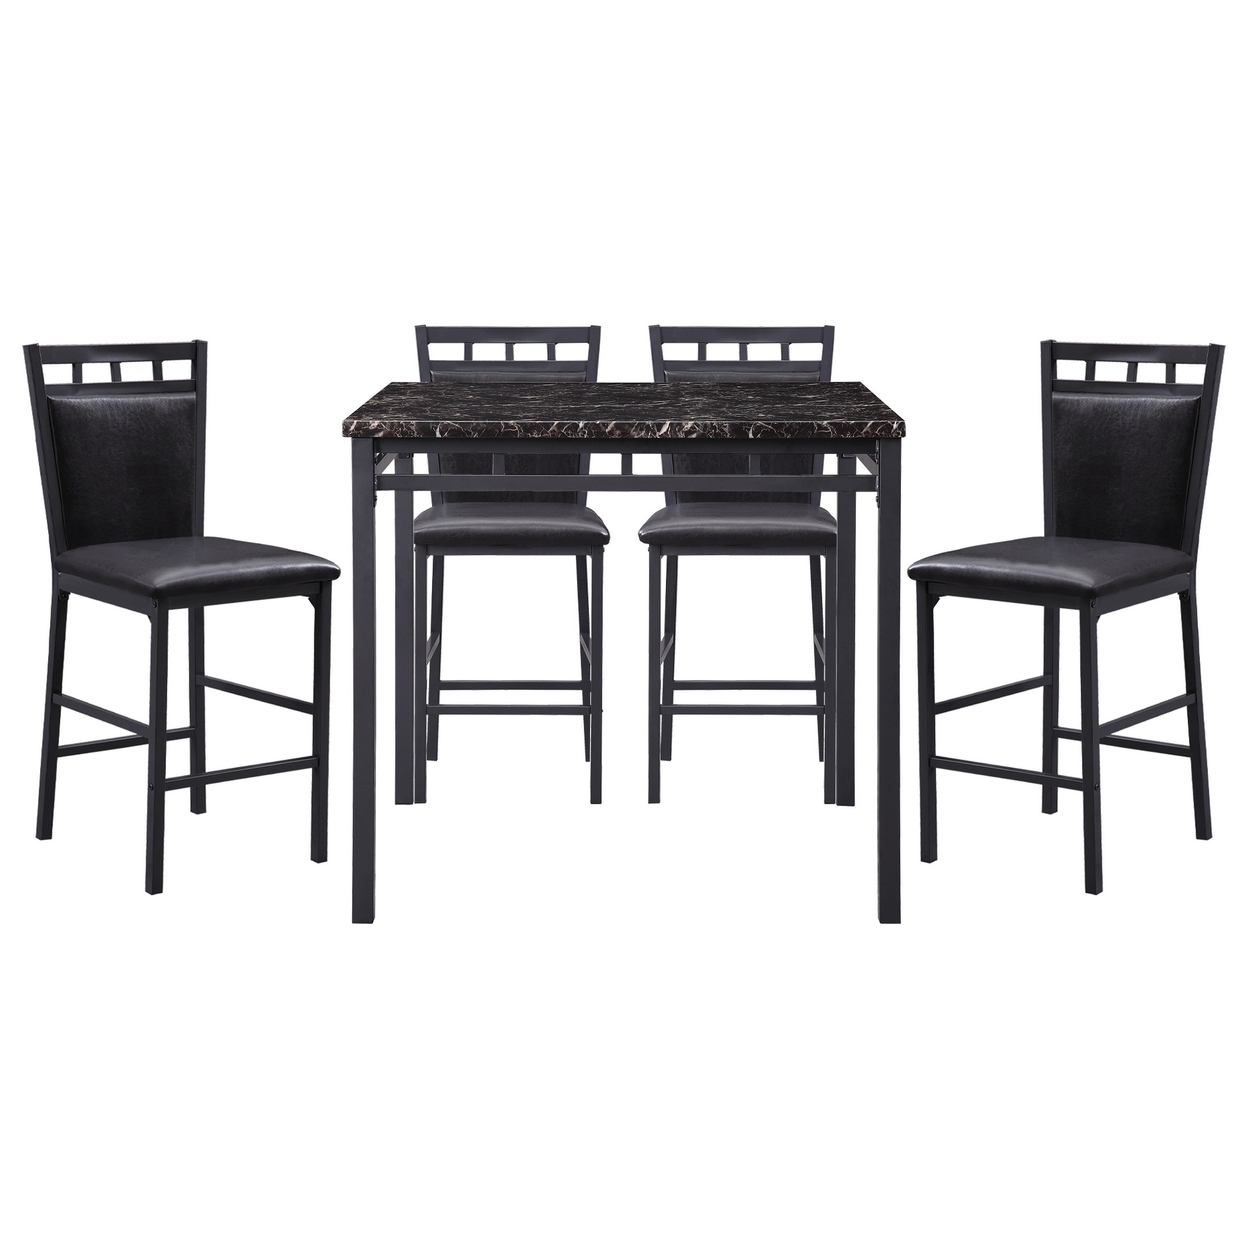 5 Piece Counter Height Table And Chair Set, Black Metal, Brown Faux Leather- Saltoro Sherpi